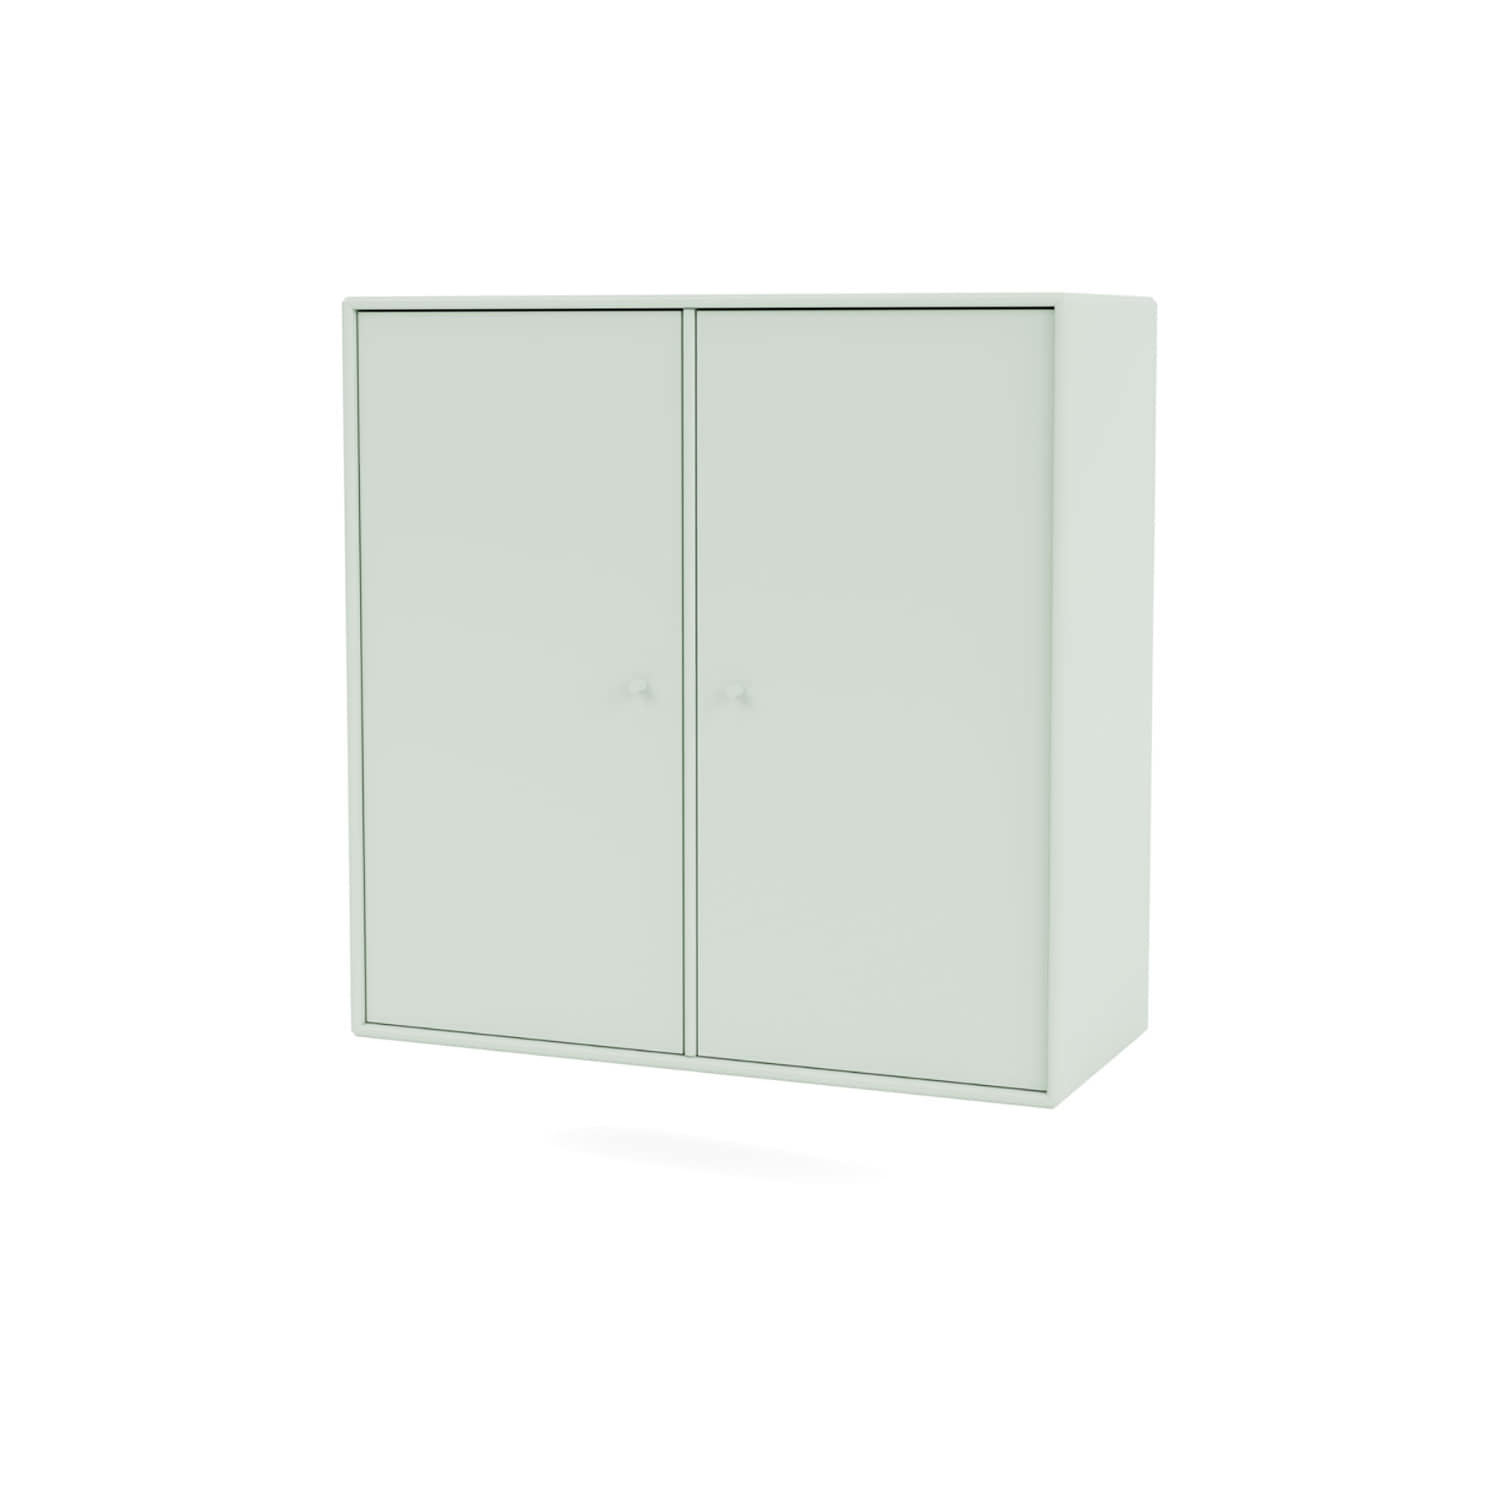 COVER Cabinet 1118, Mist